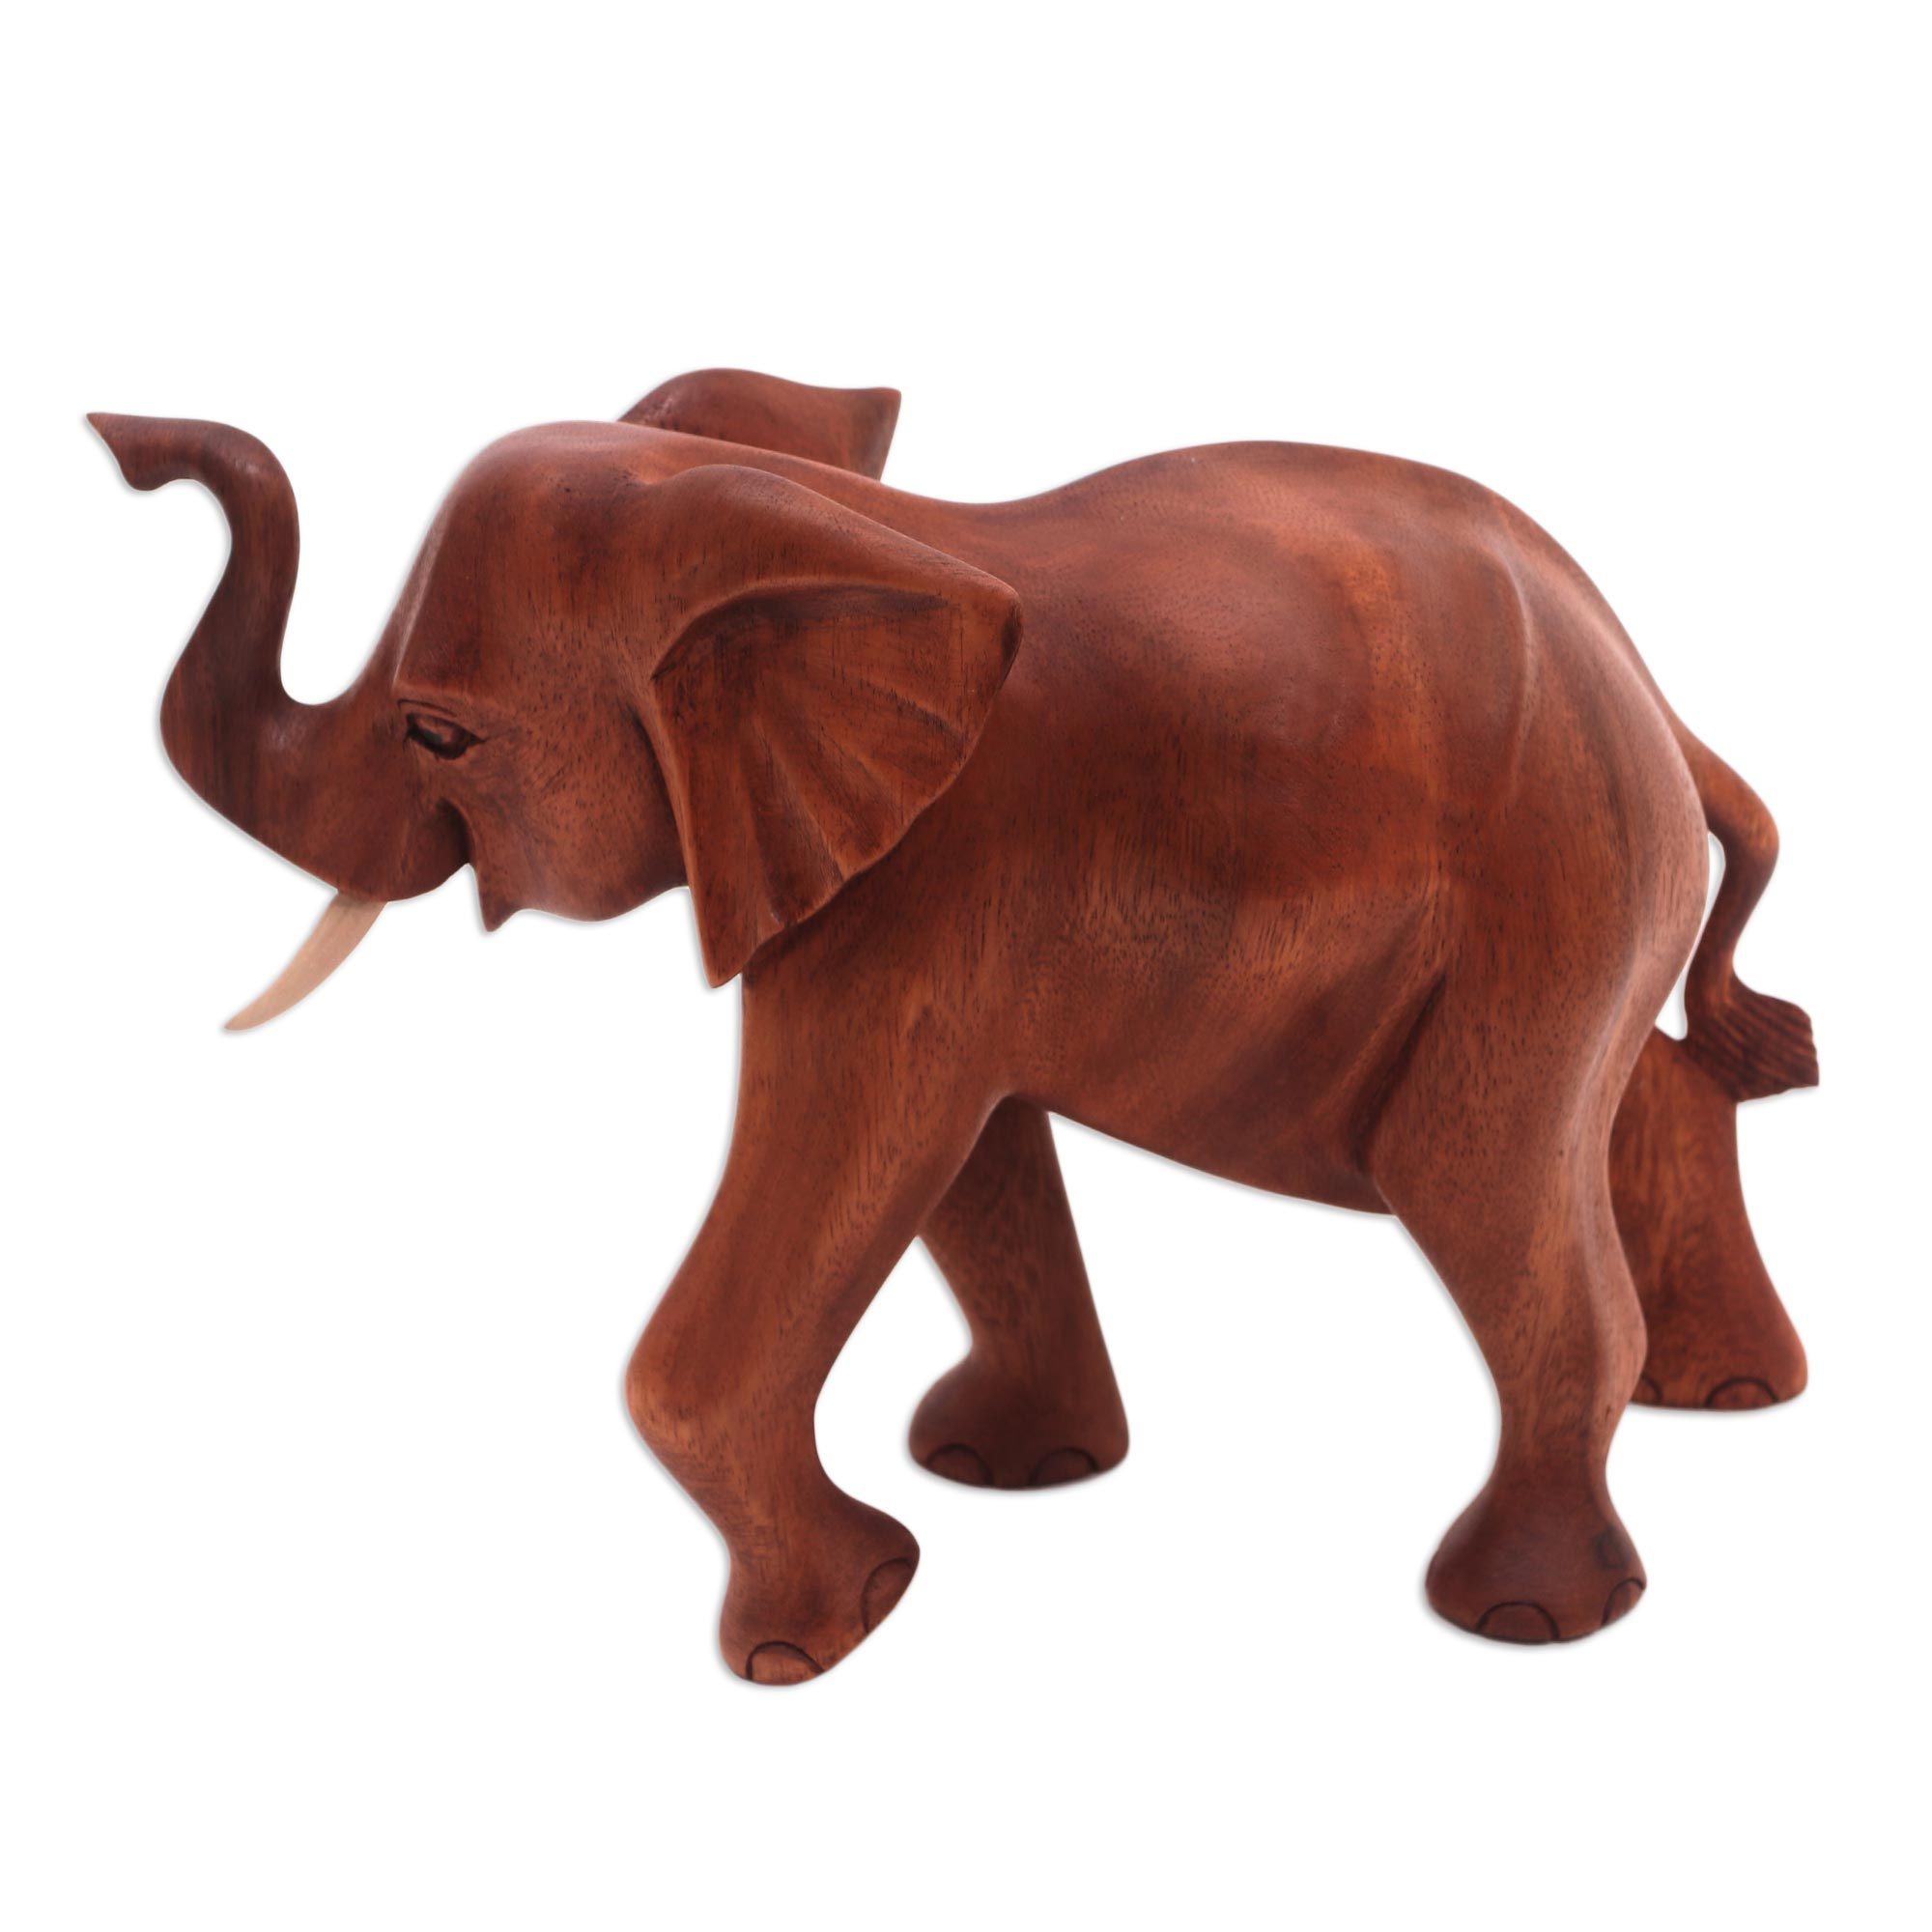 UNICEF Market | Wood Sculpture Carved in Indonesia - Elephant Trot